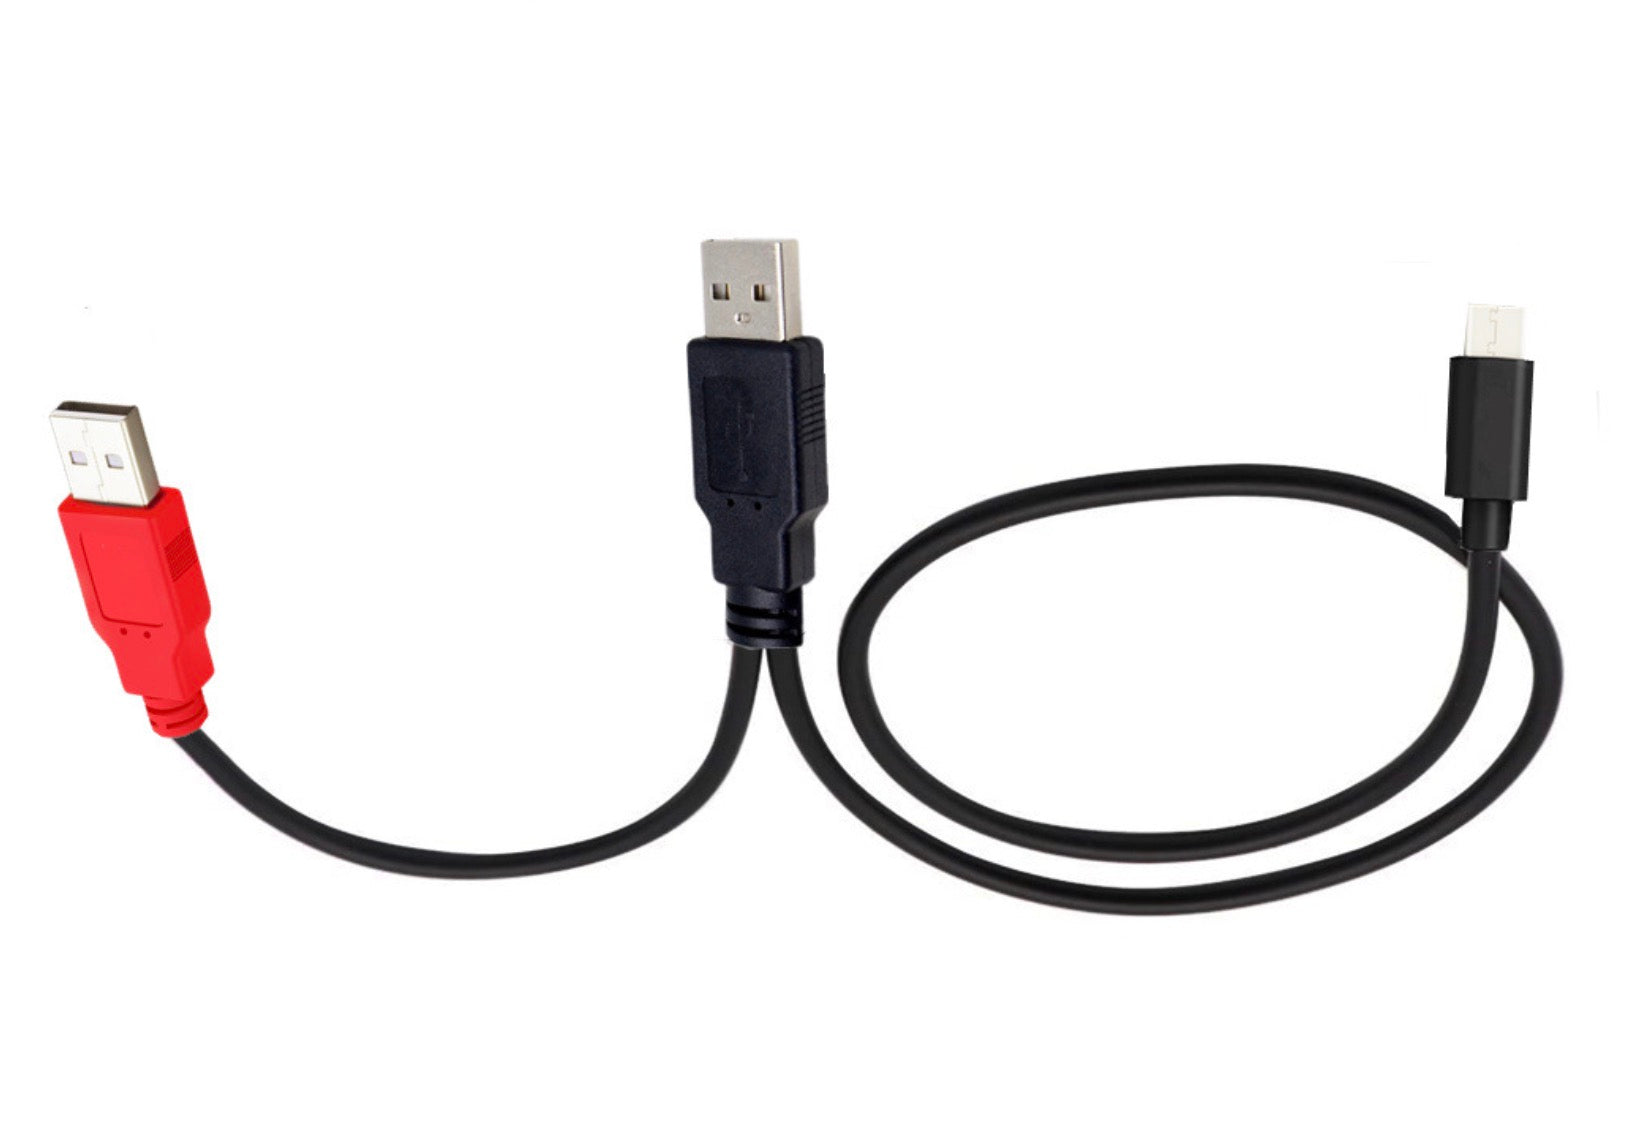 USB 2.0 A Male to USB 2.0 & USB C Male Dual Power Data Y Cable